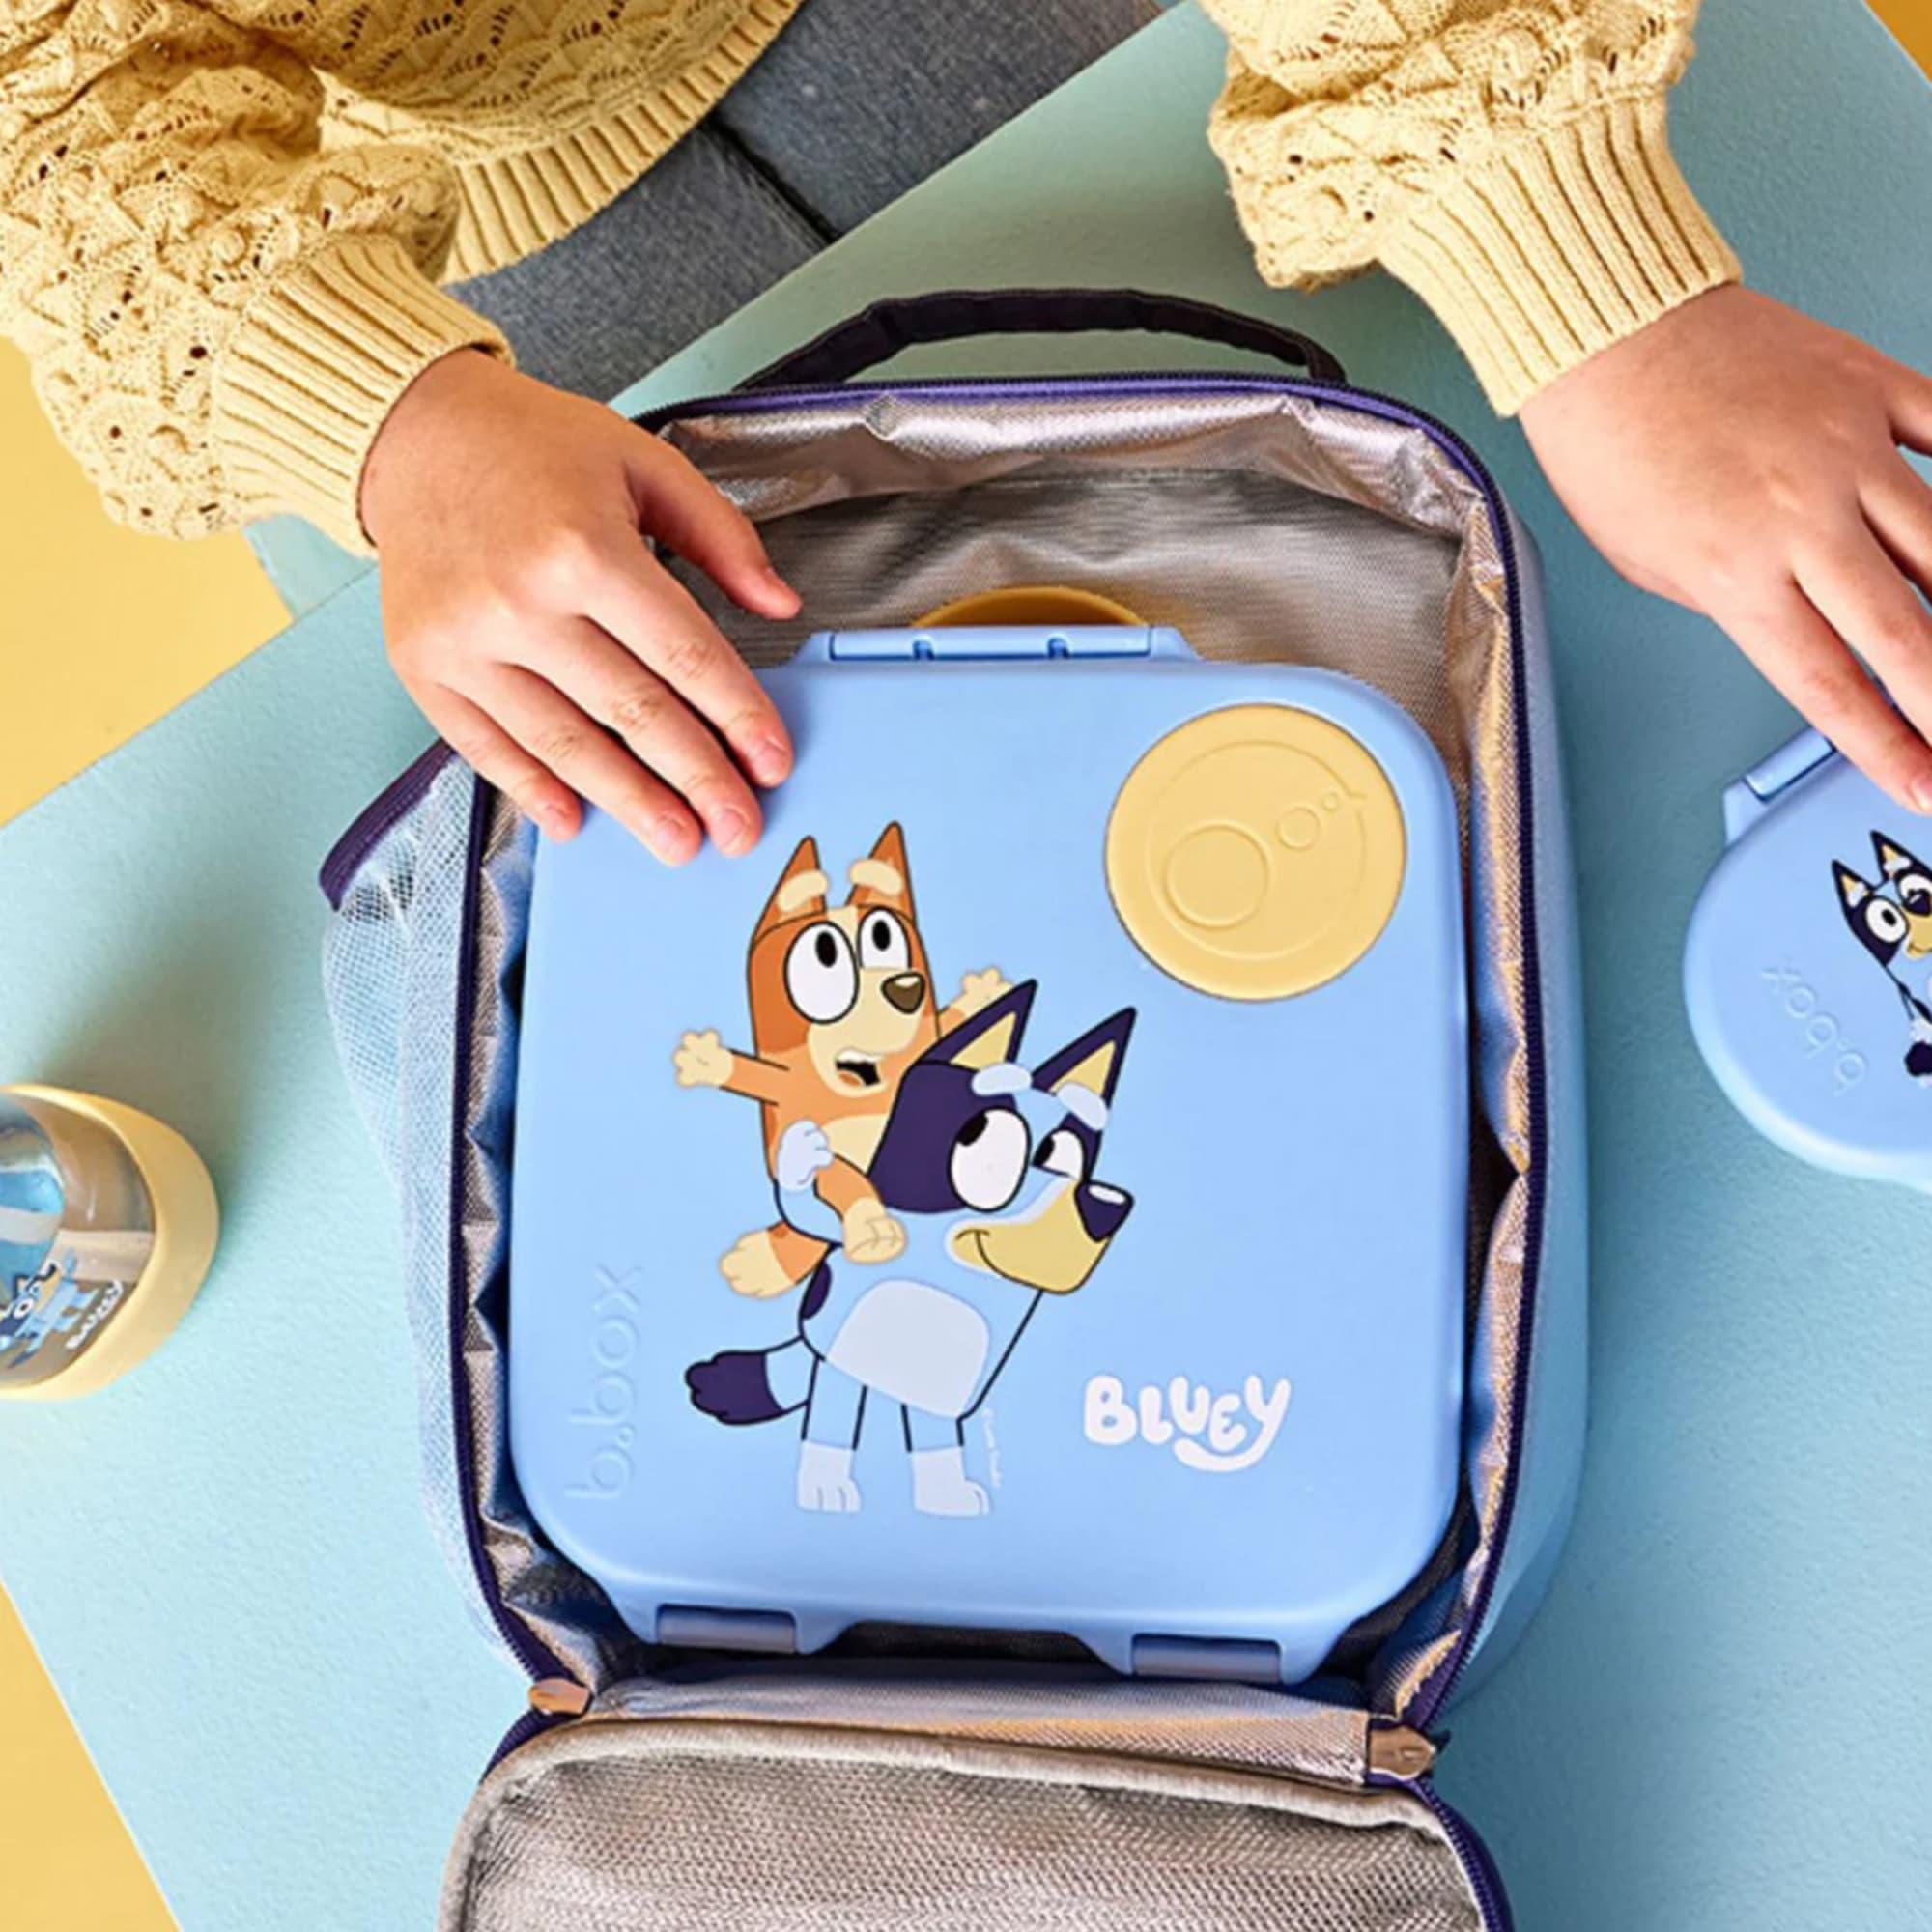 b.box Bluey Lunch Box with Gel Cooler 2L Image 4